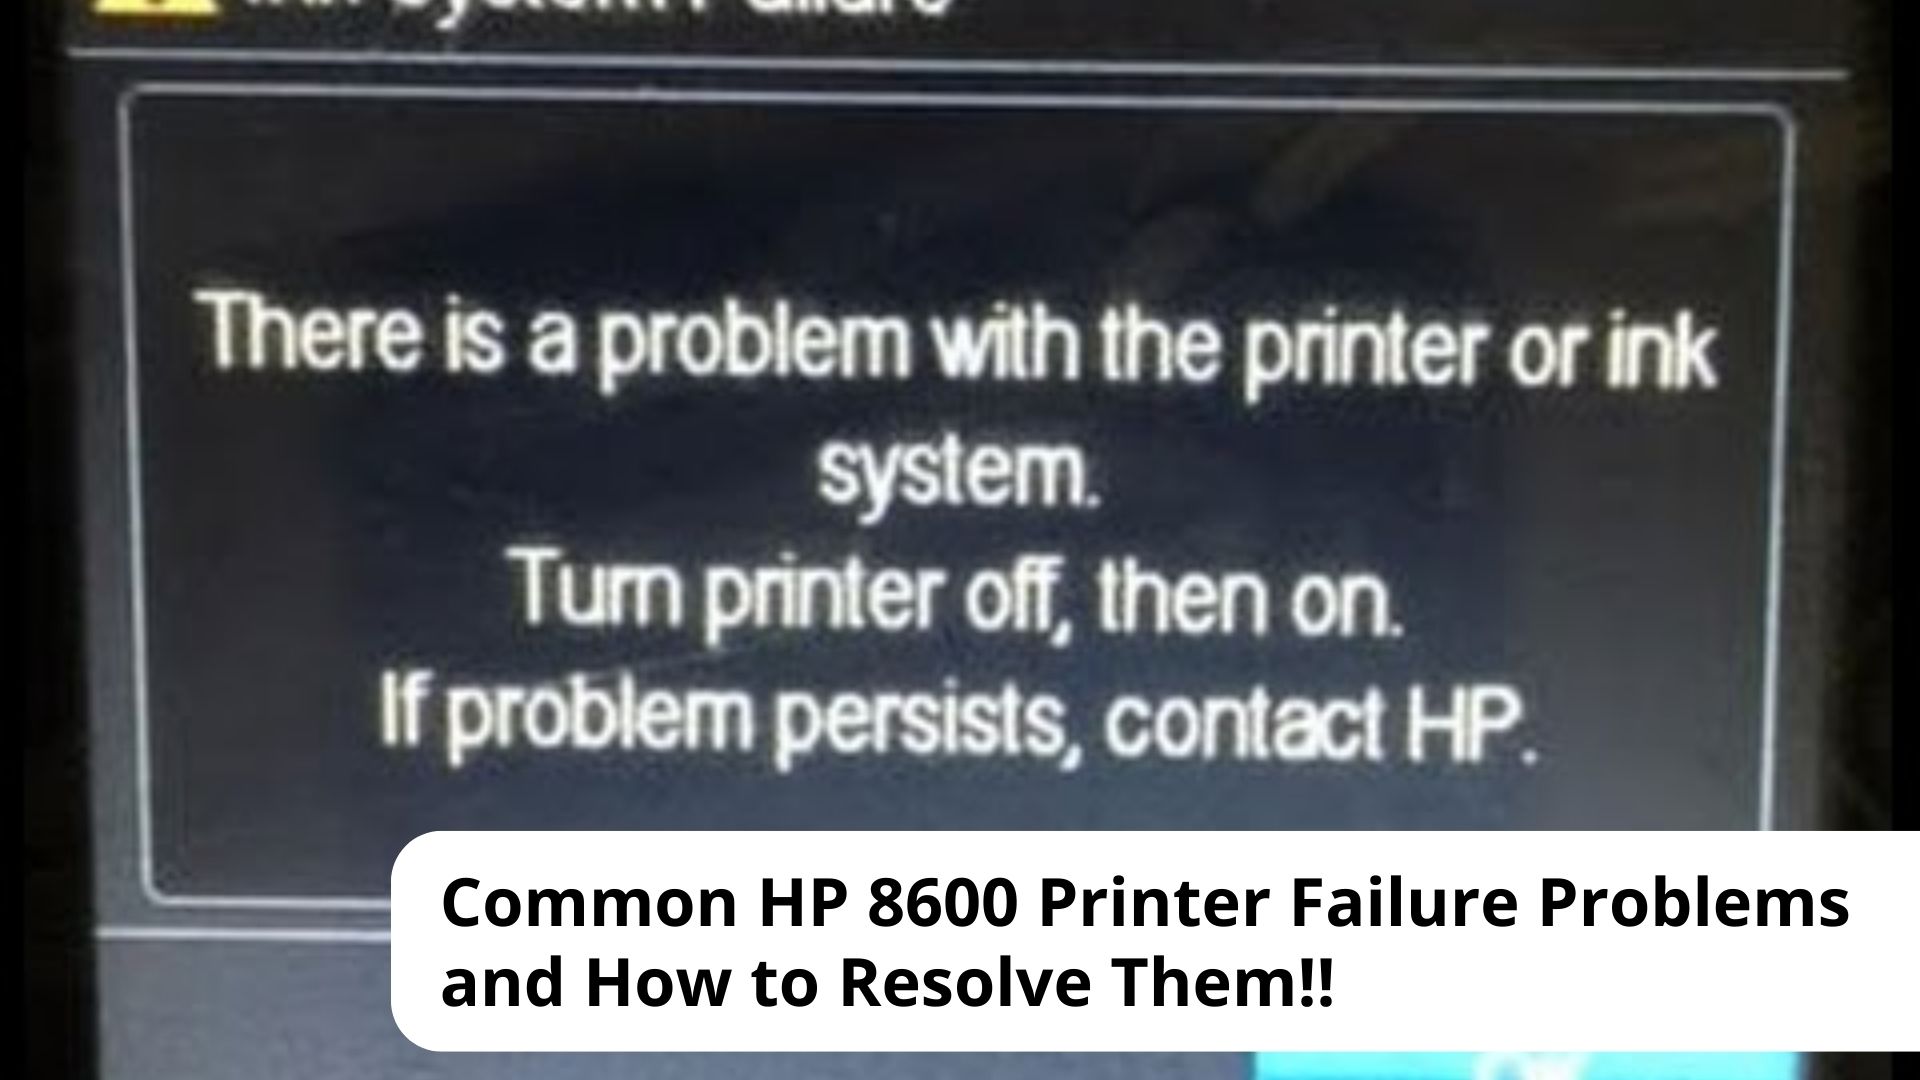 Common HP 8600 Printer Failure Problems and How to Resolve Them!!